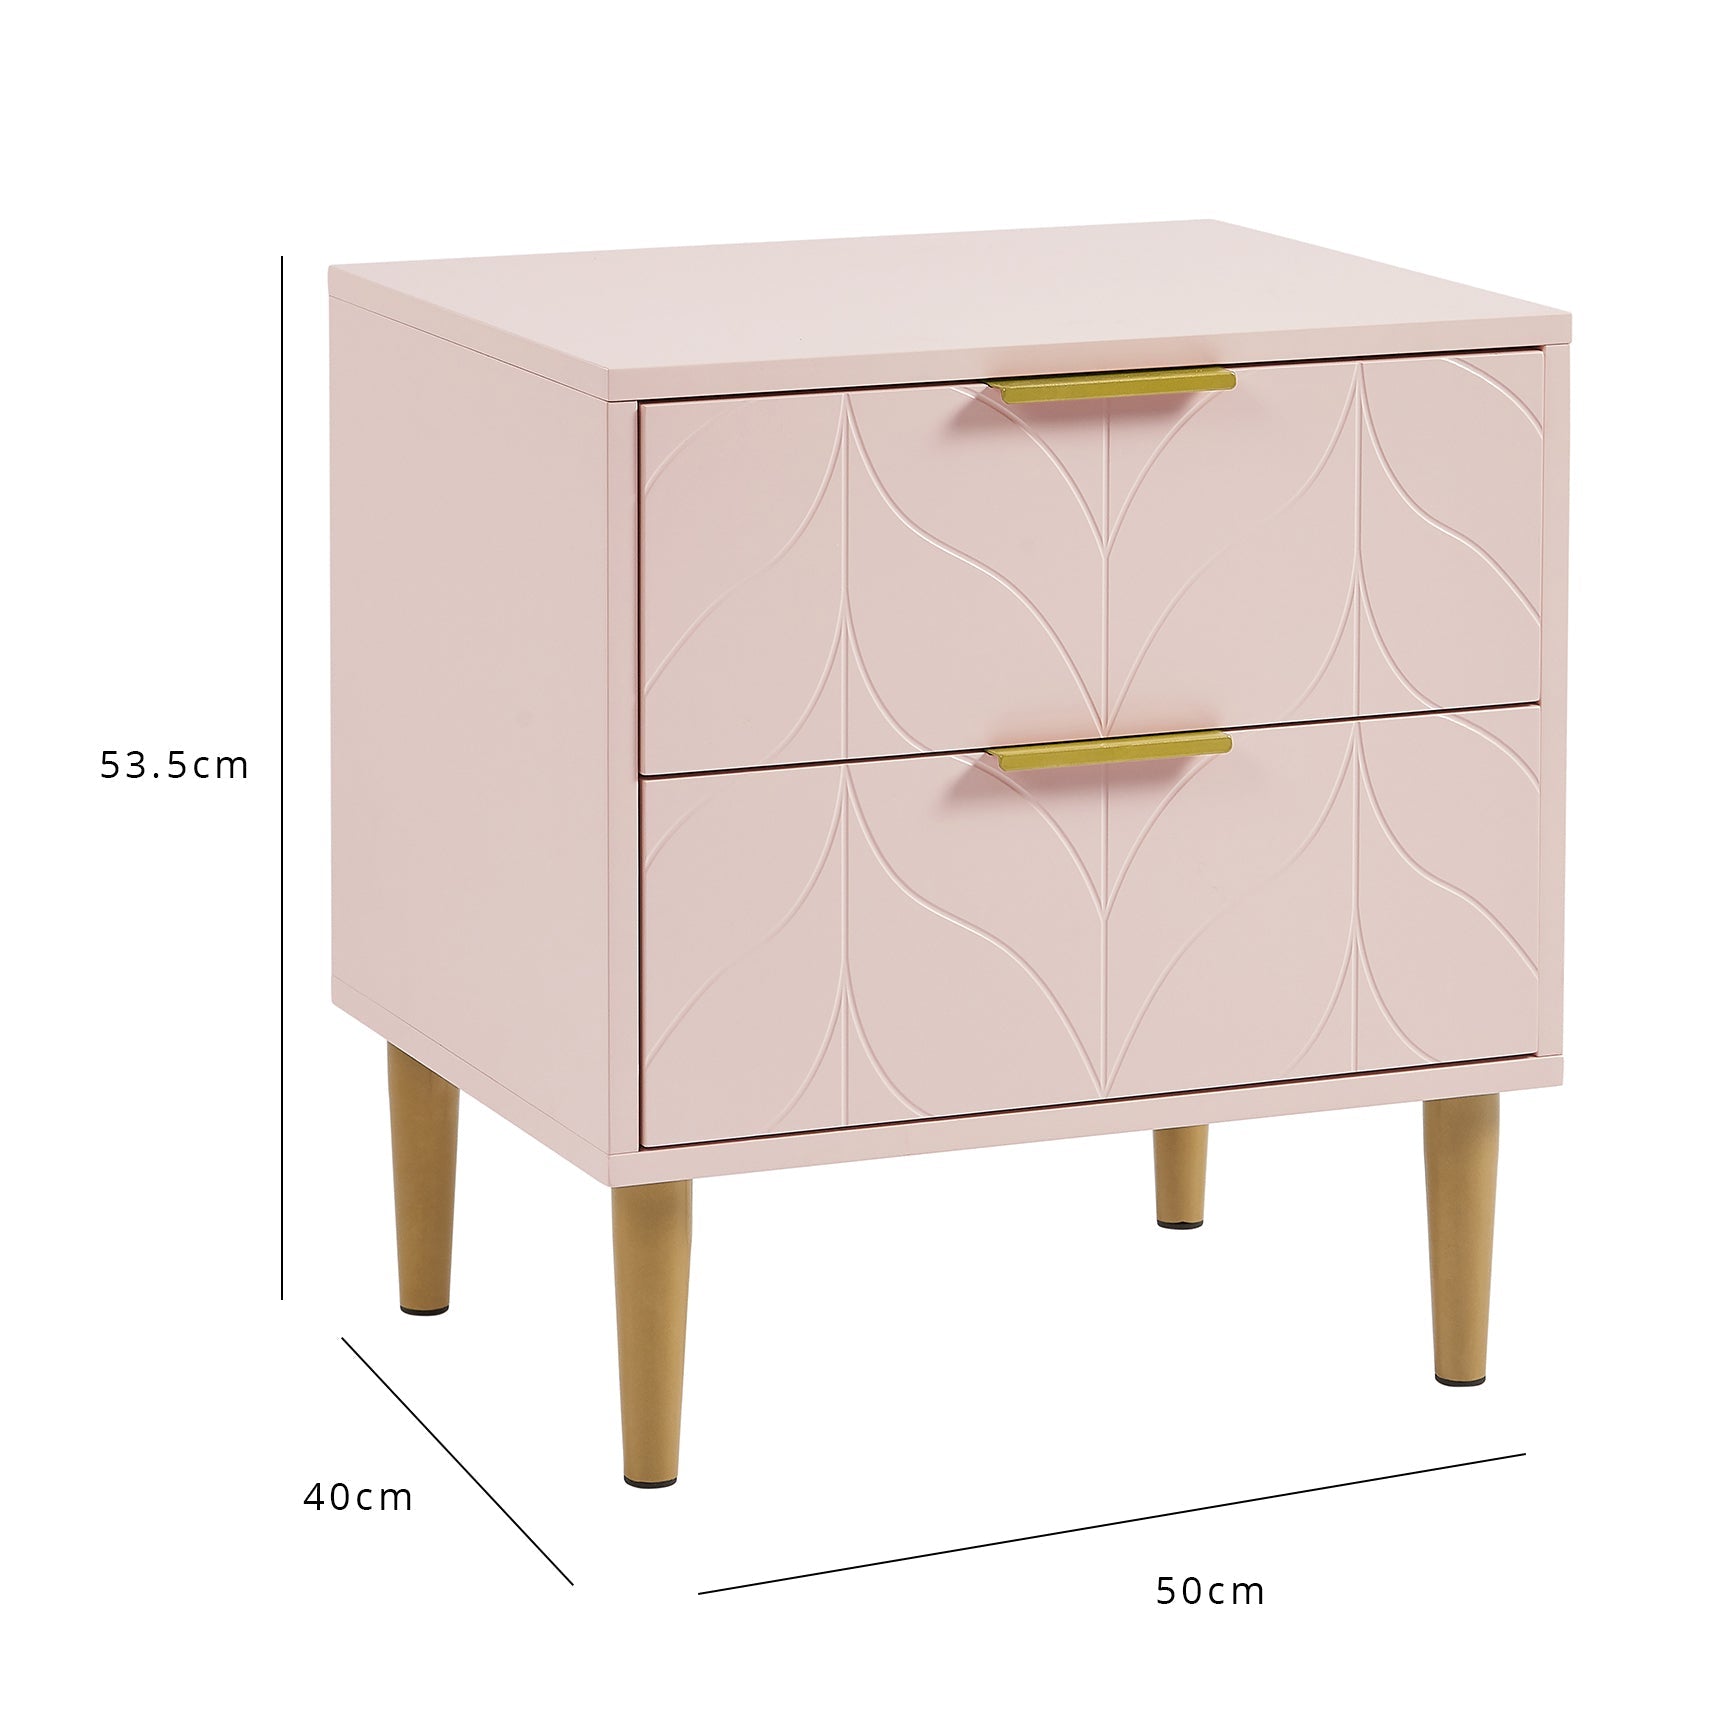 Gloria 4 piece bedroom furniture set - 4 over 4 chest of drawers - pale pink - Laura James